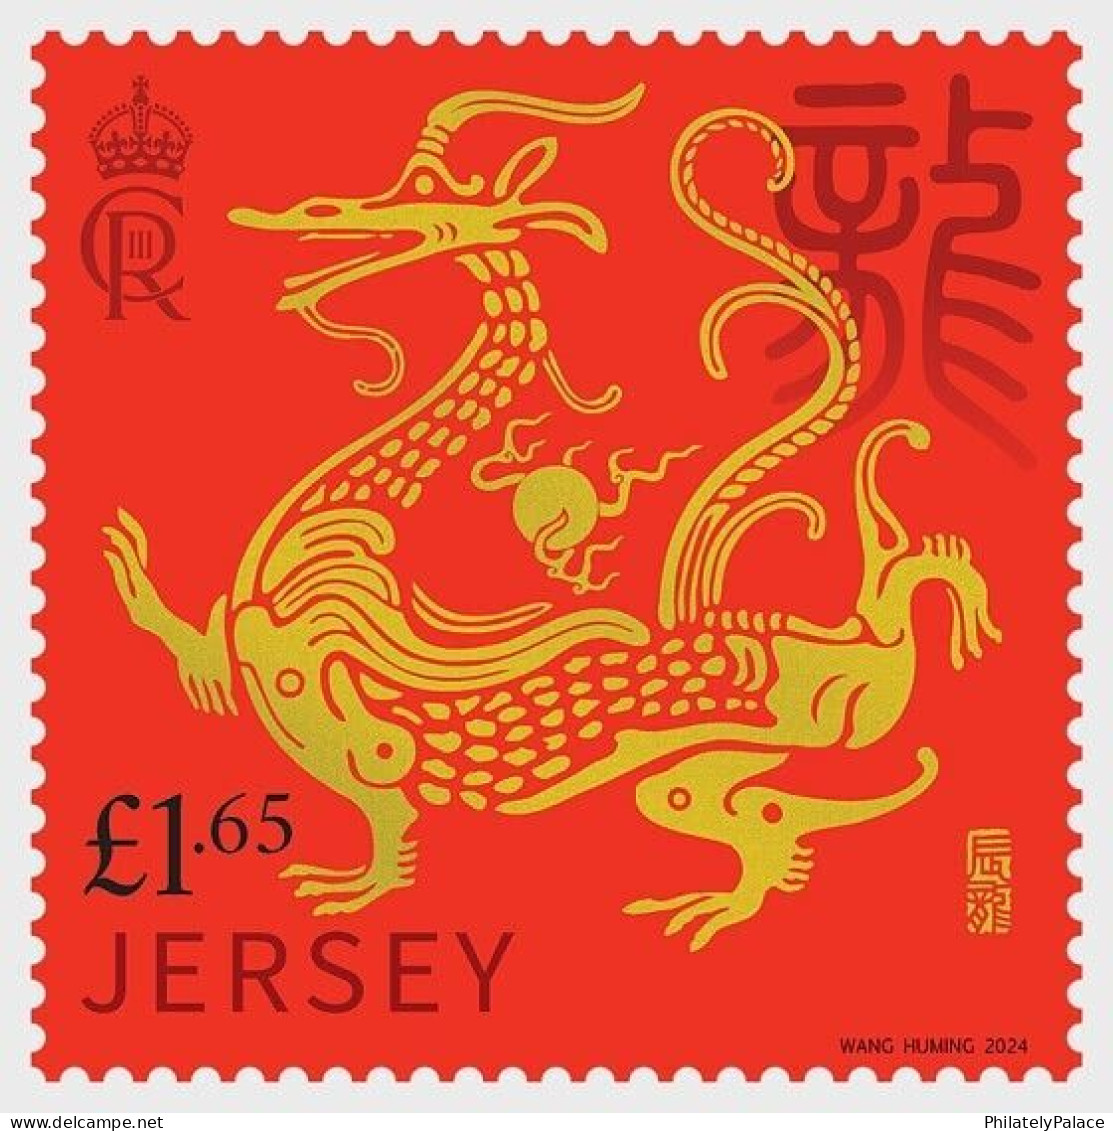 JERSEY 2024 ZODIAC, LUNAR YEAR OF DRAGON, COMP. SET OF 1 STAMP IN MINT MNH (**) - Año Nuevo Chino